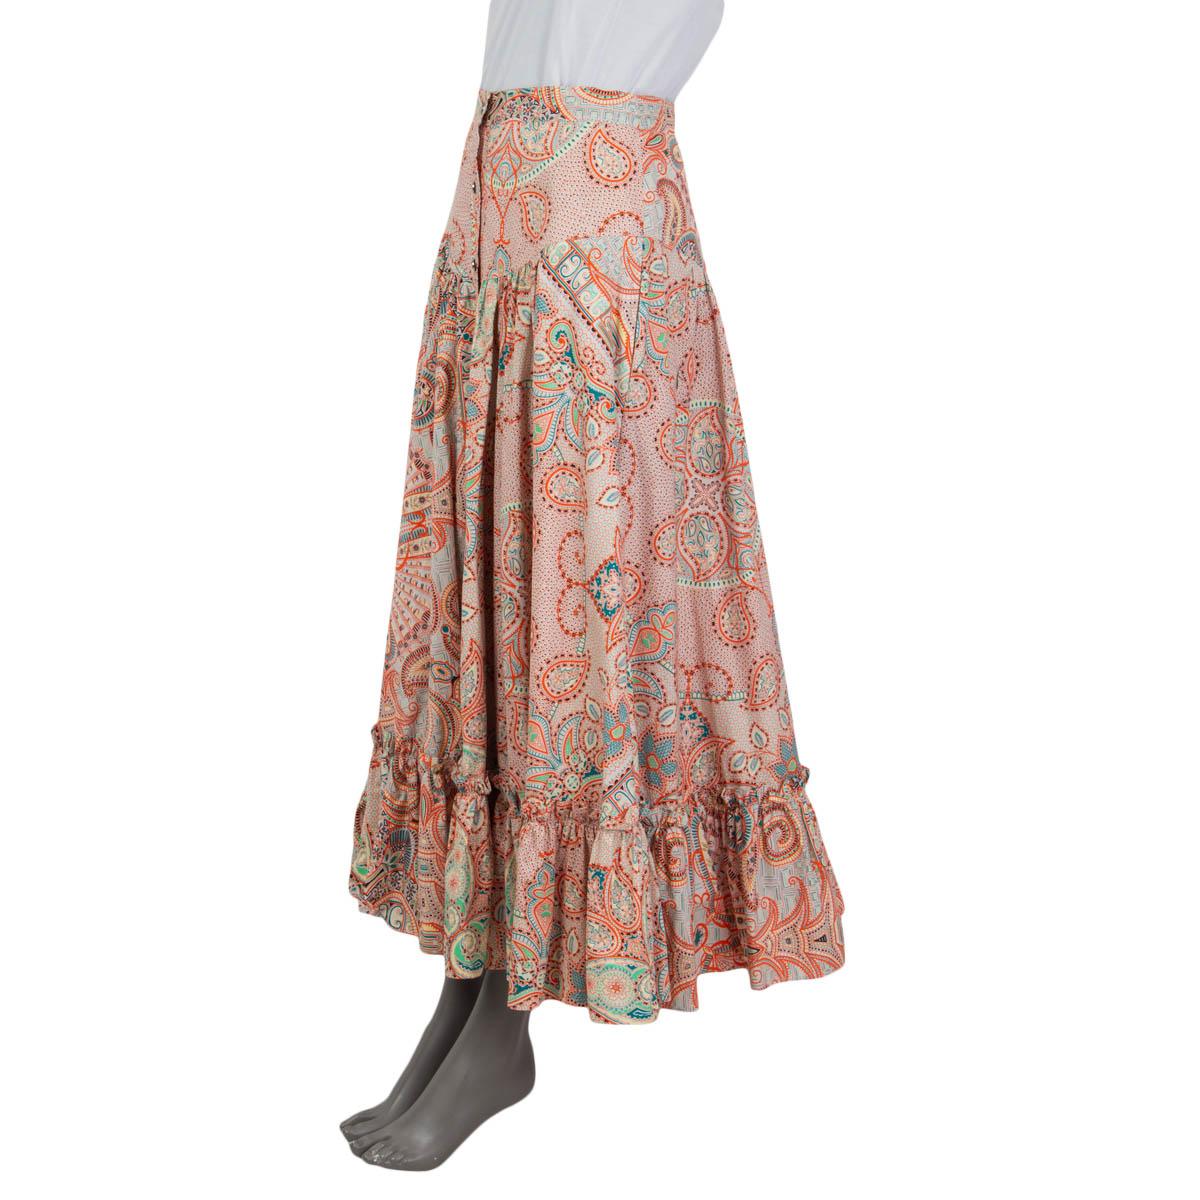 100% authentic Etro 'Papaya' gathered poplin midi skirt in orange, off-white, turquoise and yellow cotton (100%). Features two slit pockets on the sides. Opens with buttons on the front. Unlined. Brand new, with tags.

Measurements
Tag